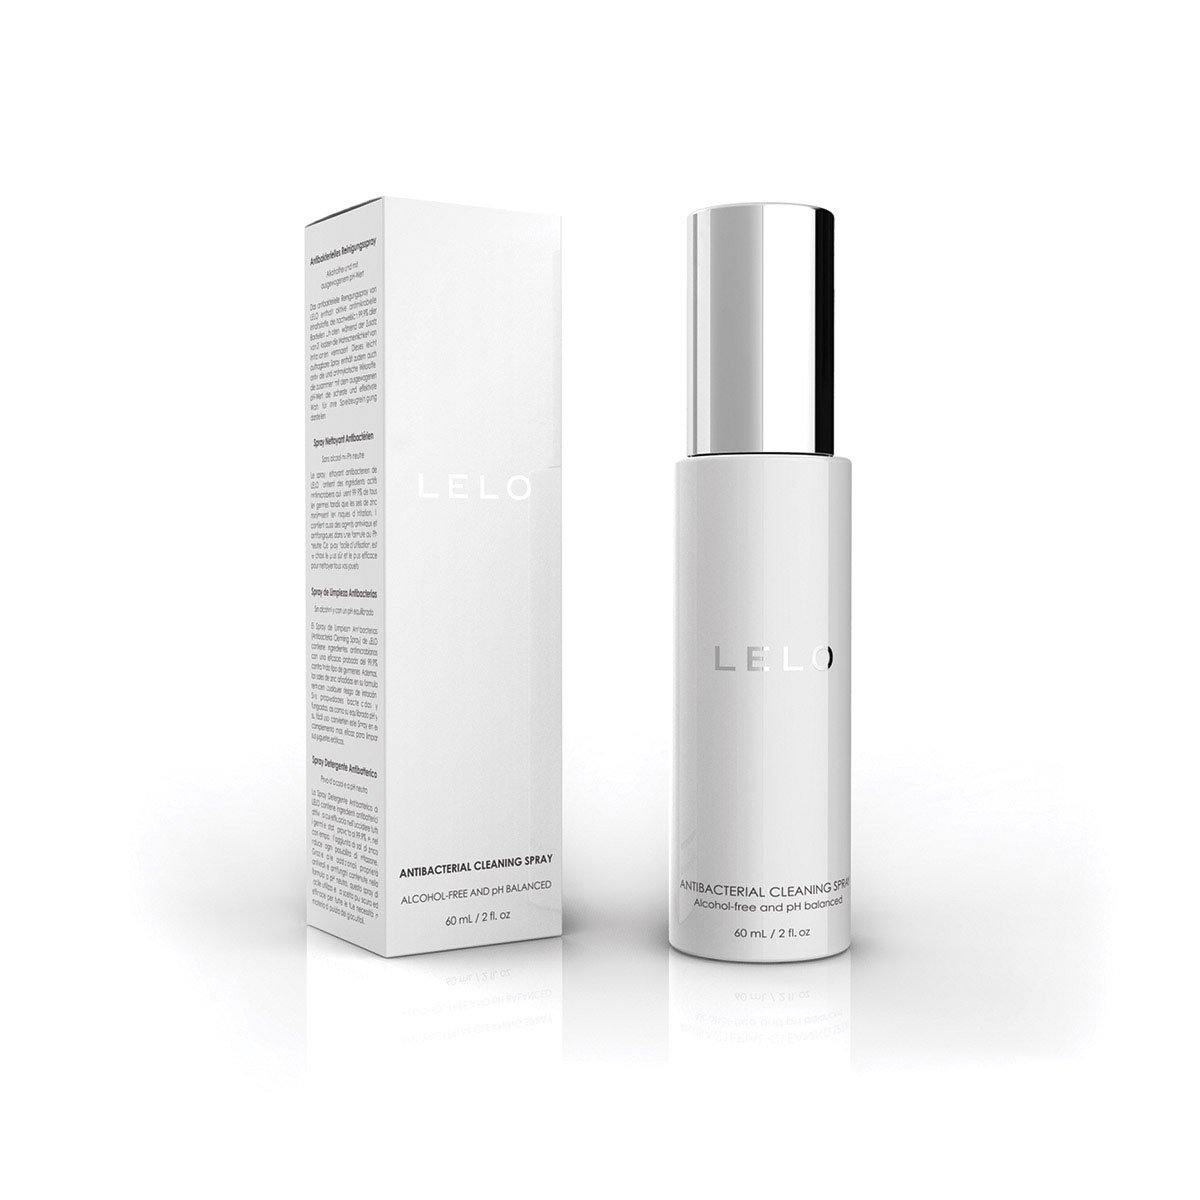 Lelo Antibacterial Cleaning Spray - Buy At Luxury Toy X - Free 3-Day Shipping